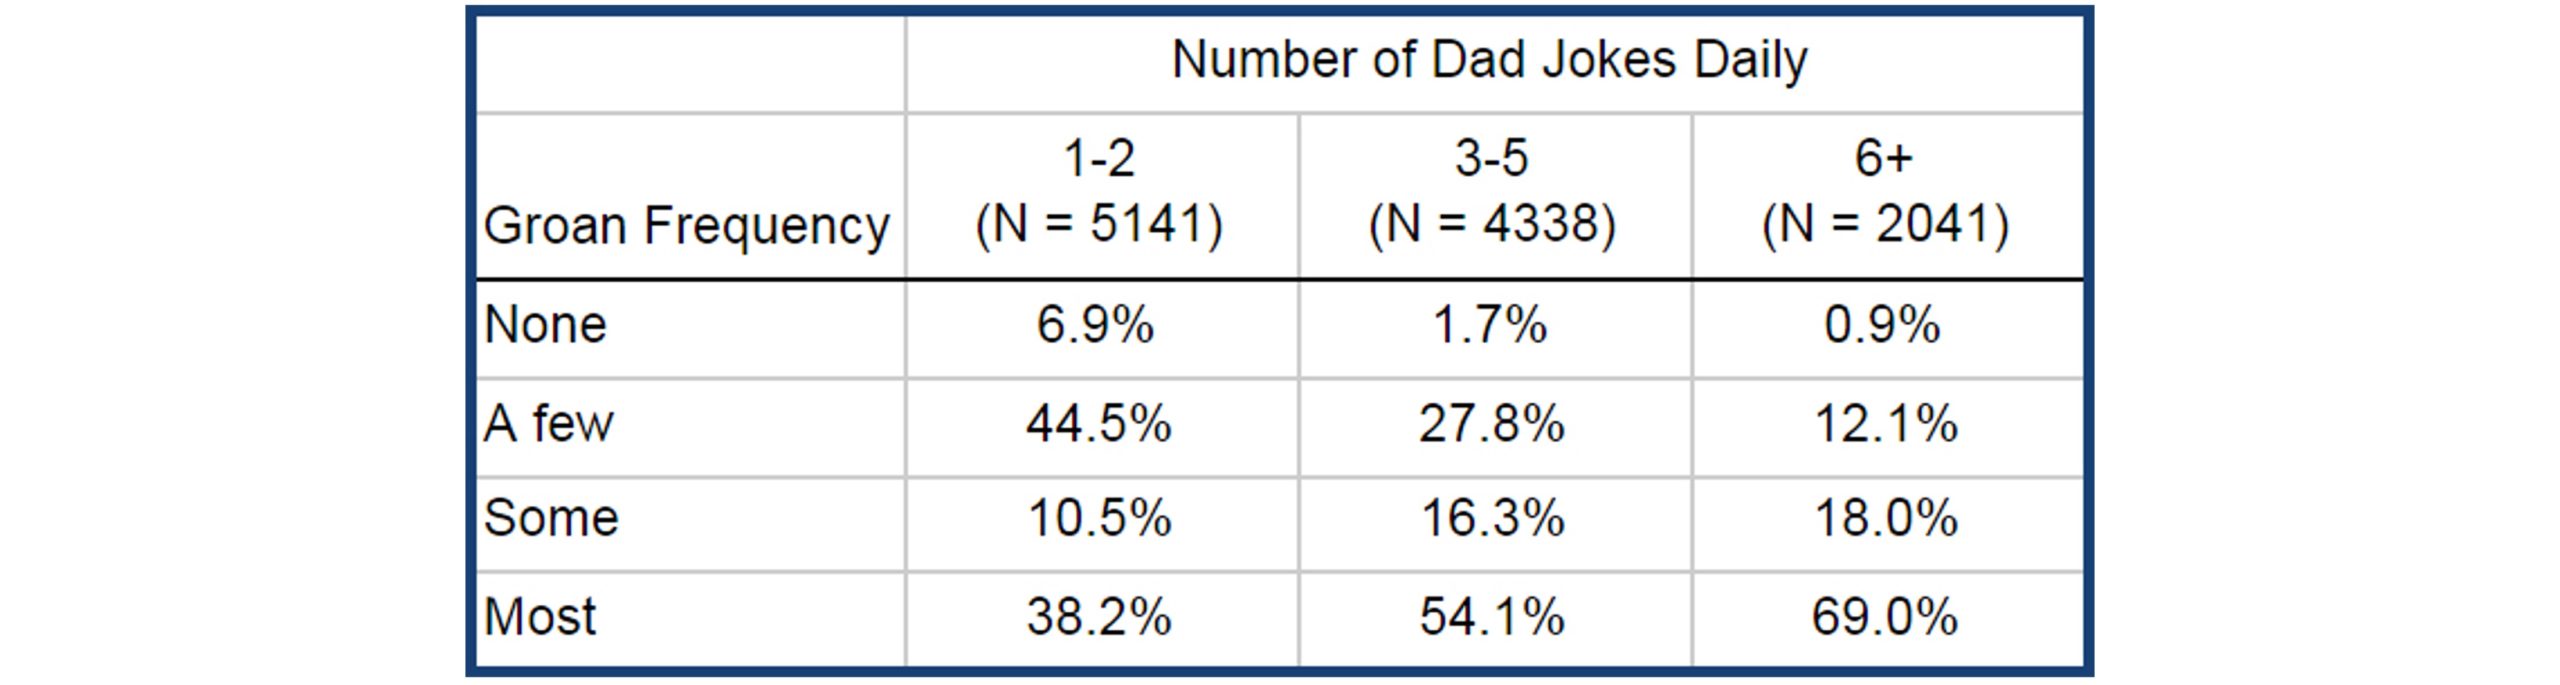 Frequency of Dad Jokes Daily